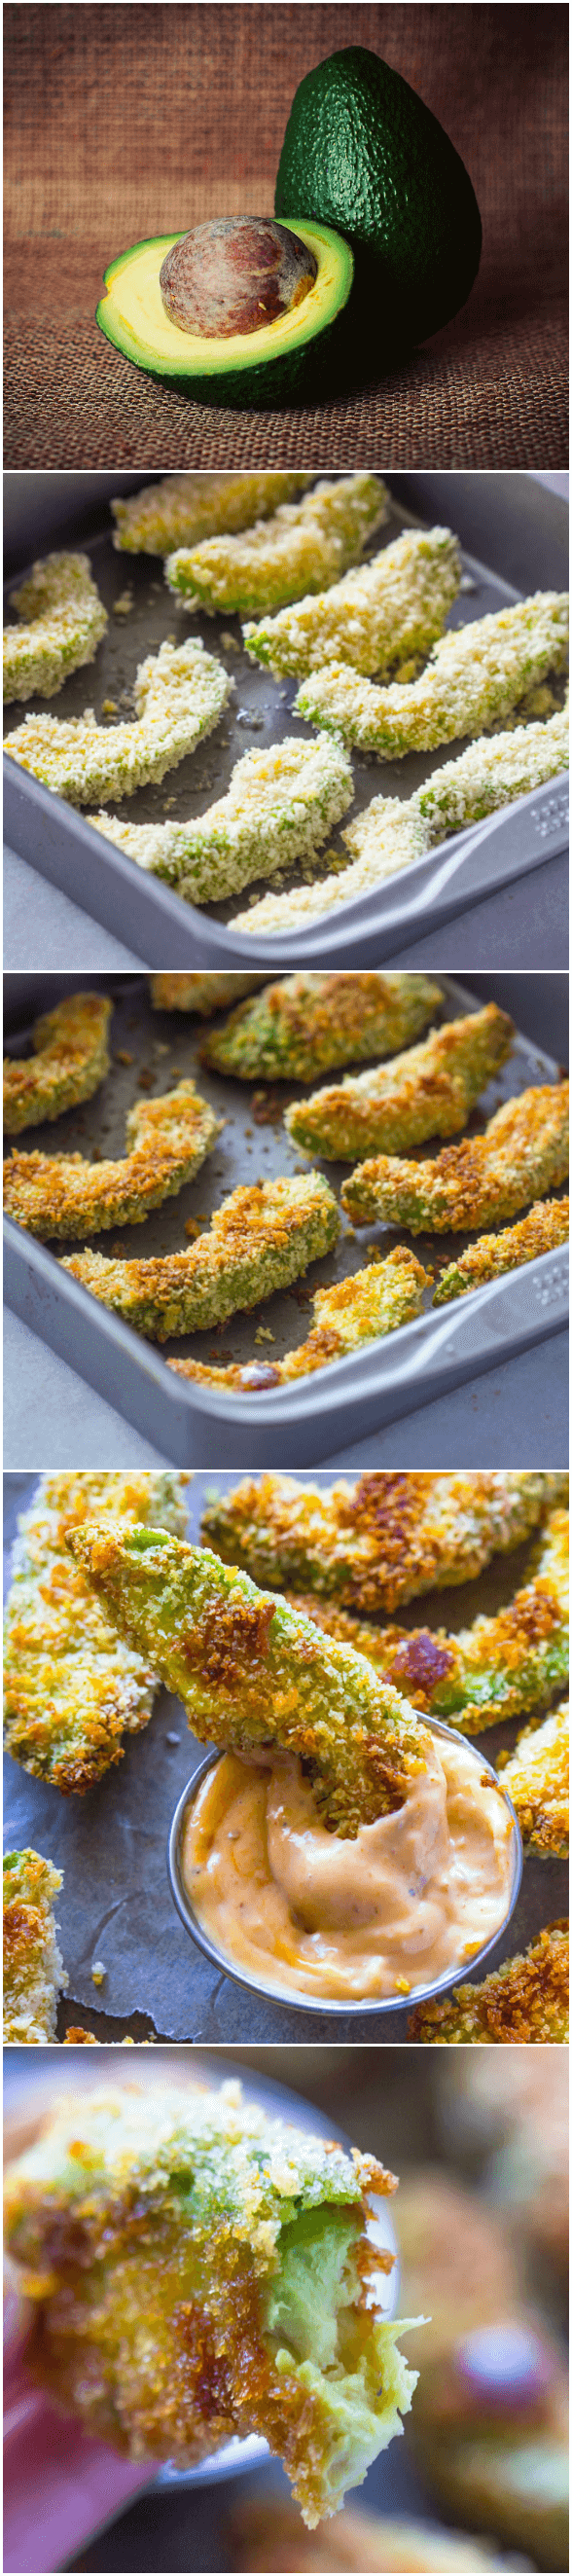 Healthy Crispy Baked Avocado Fries & Chipotle Dipping Sauce